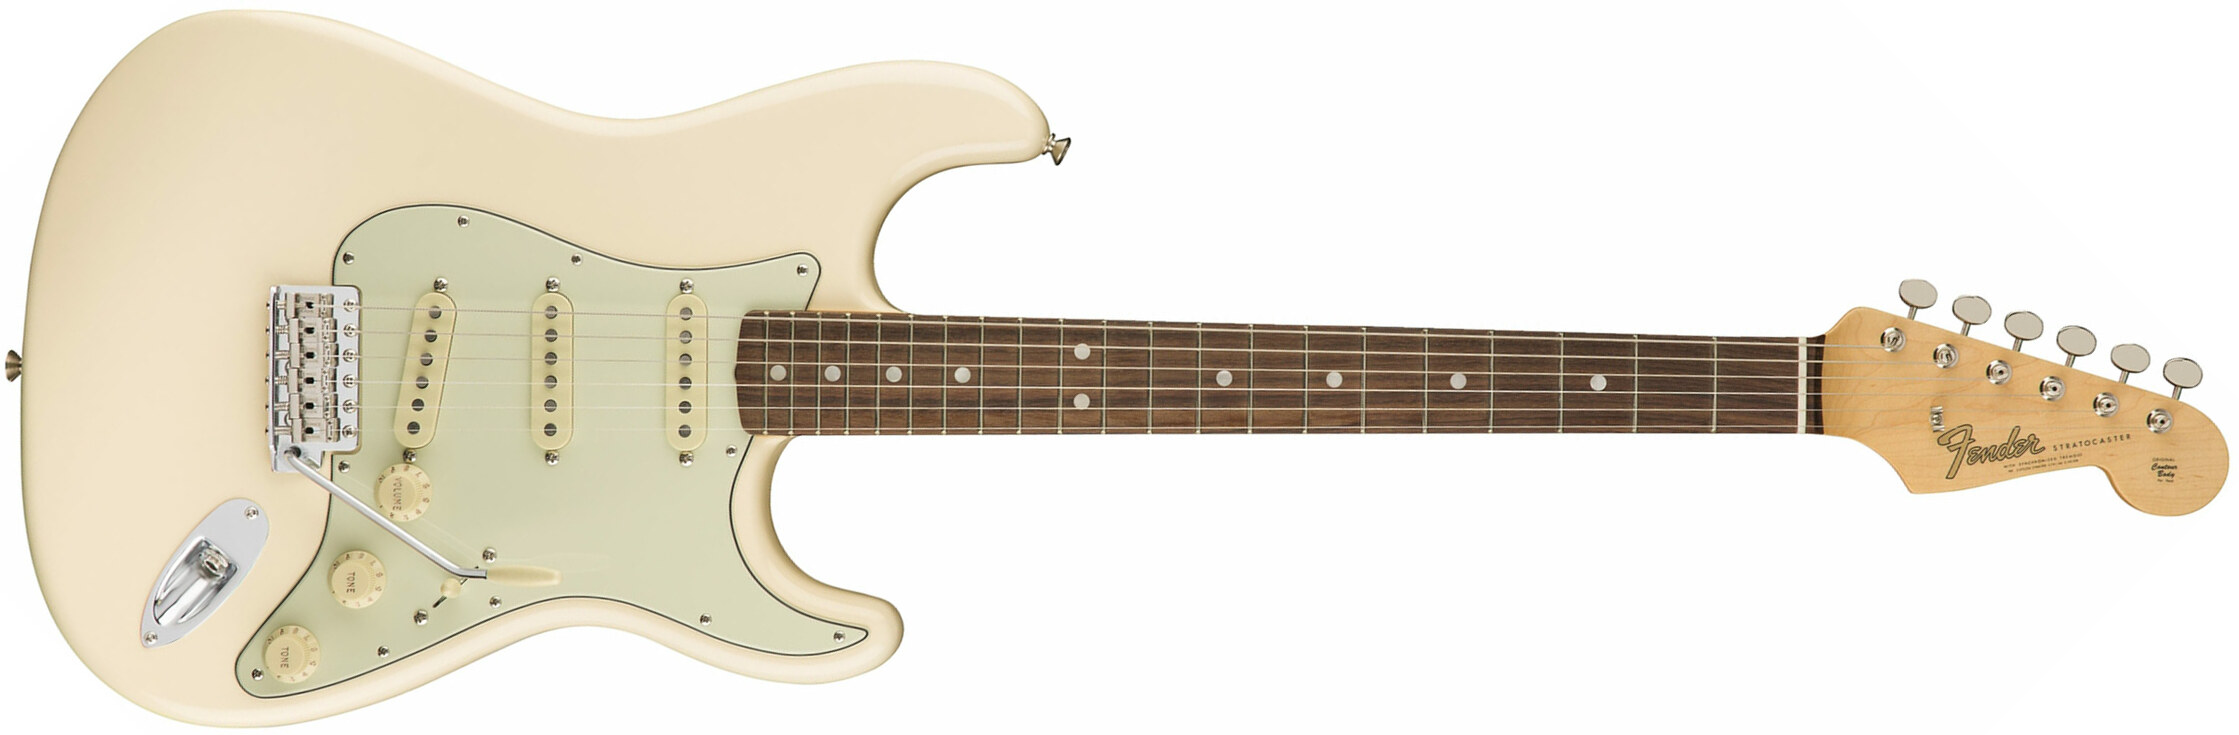 Fender Strat '60s American Original Usa Sss Rw - Olympic White - Str shape electric guitar - Main picture